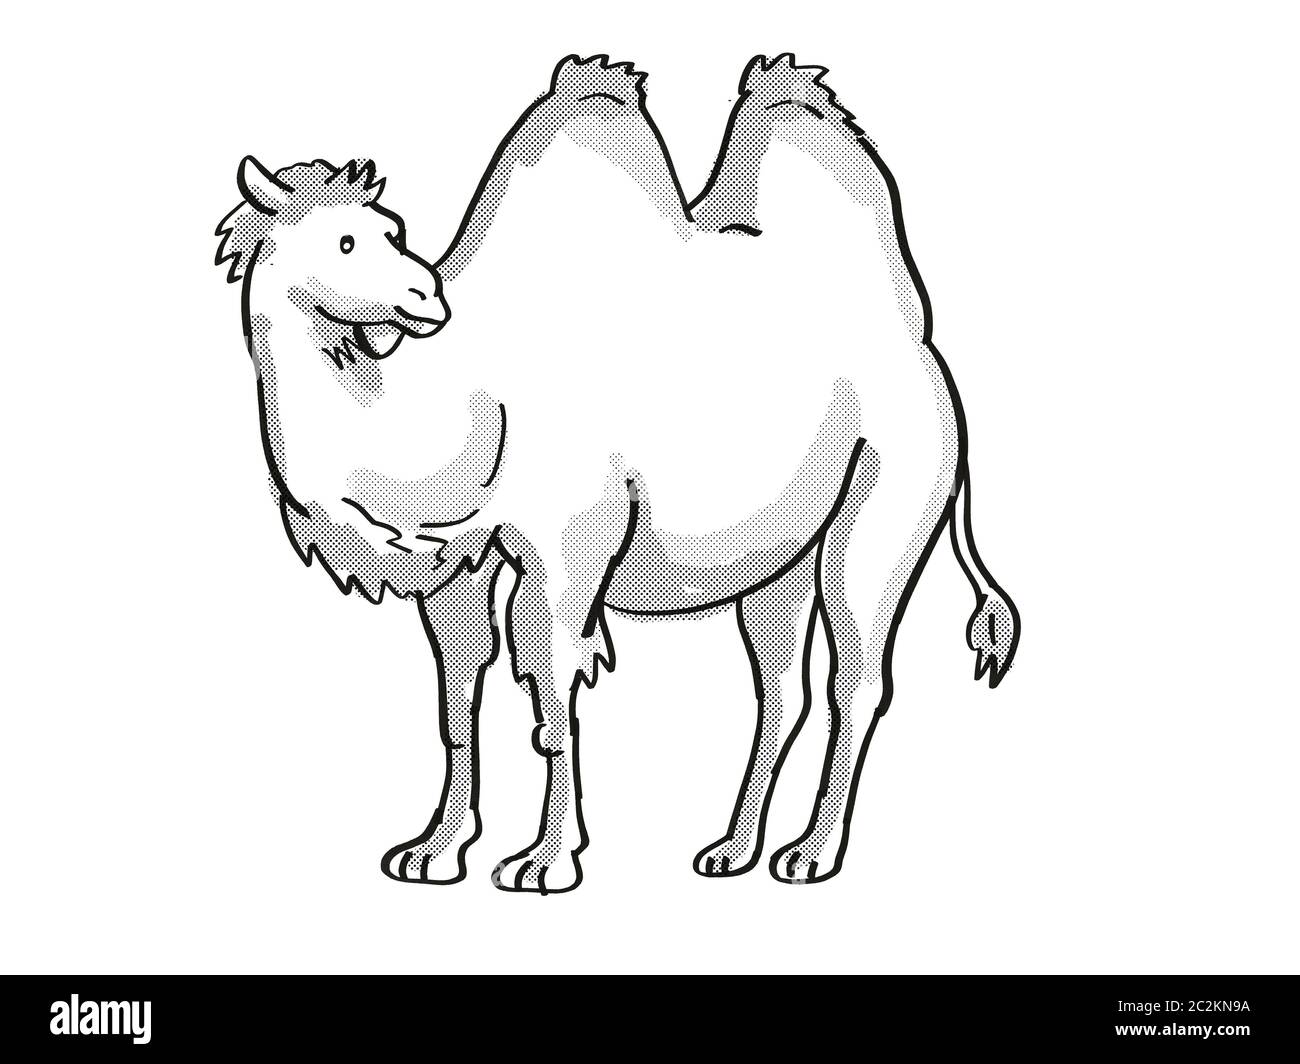 Retro cartoon mono line style drawing of a Bactrian Camel or ...